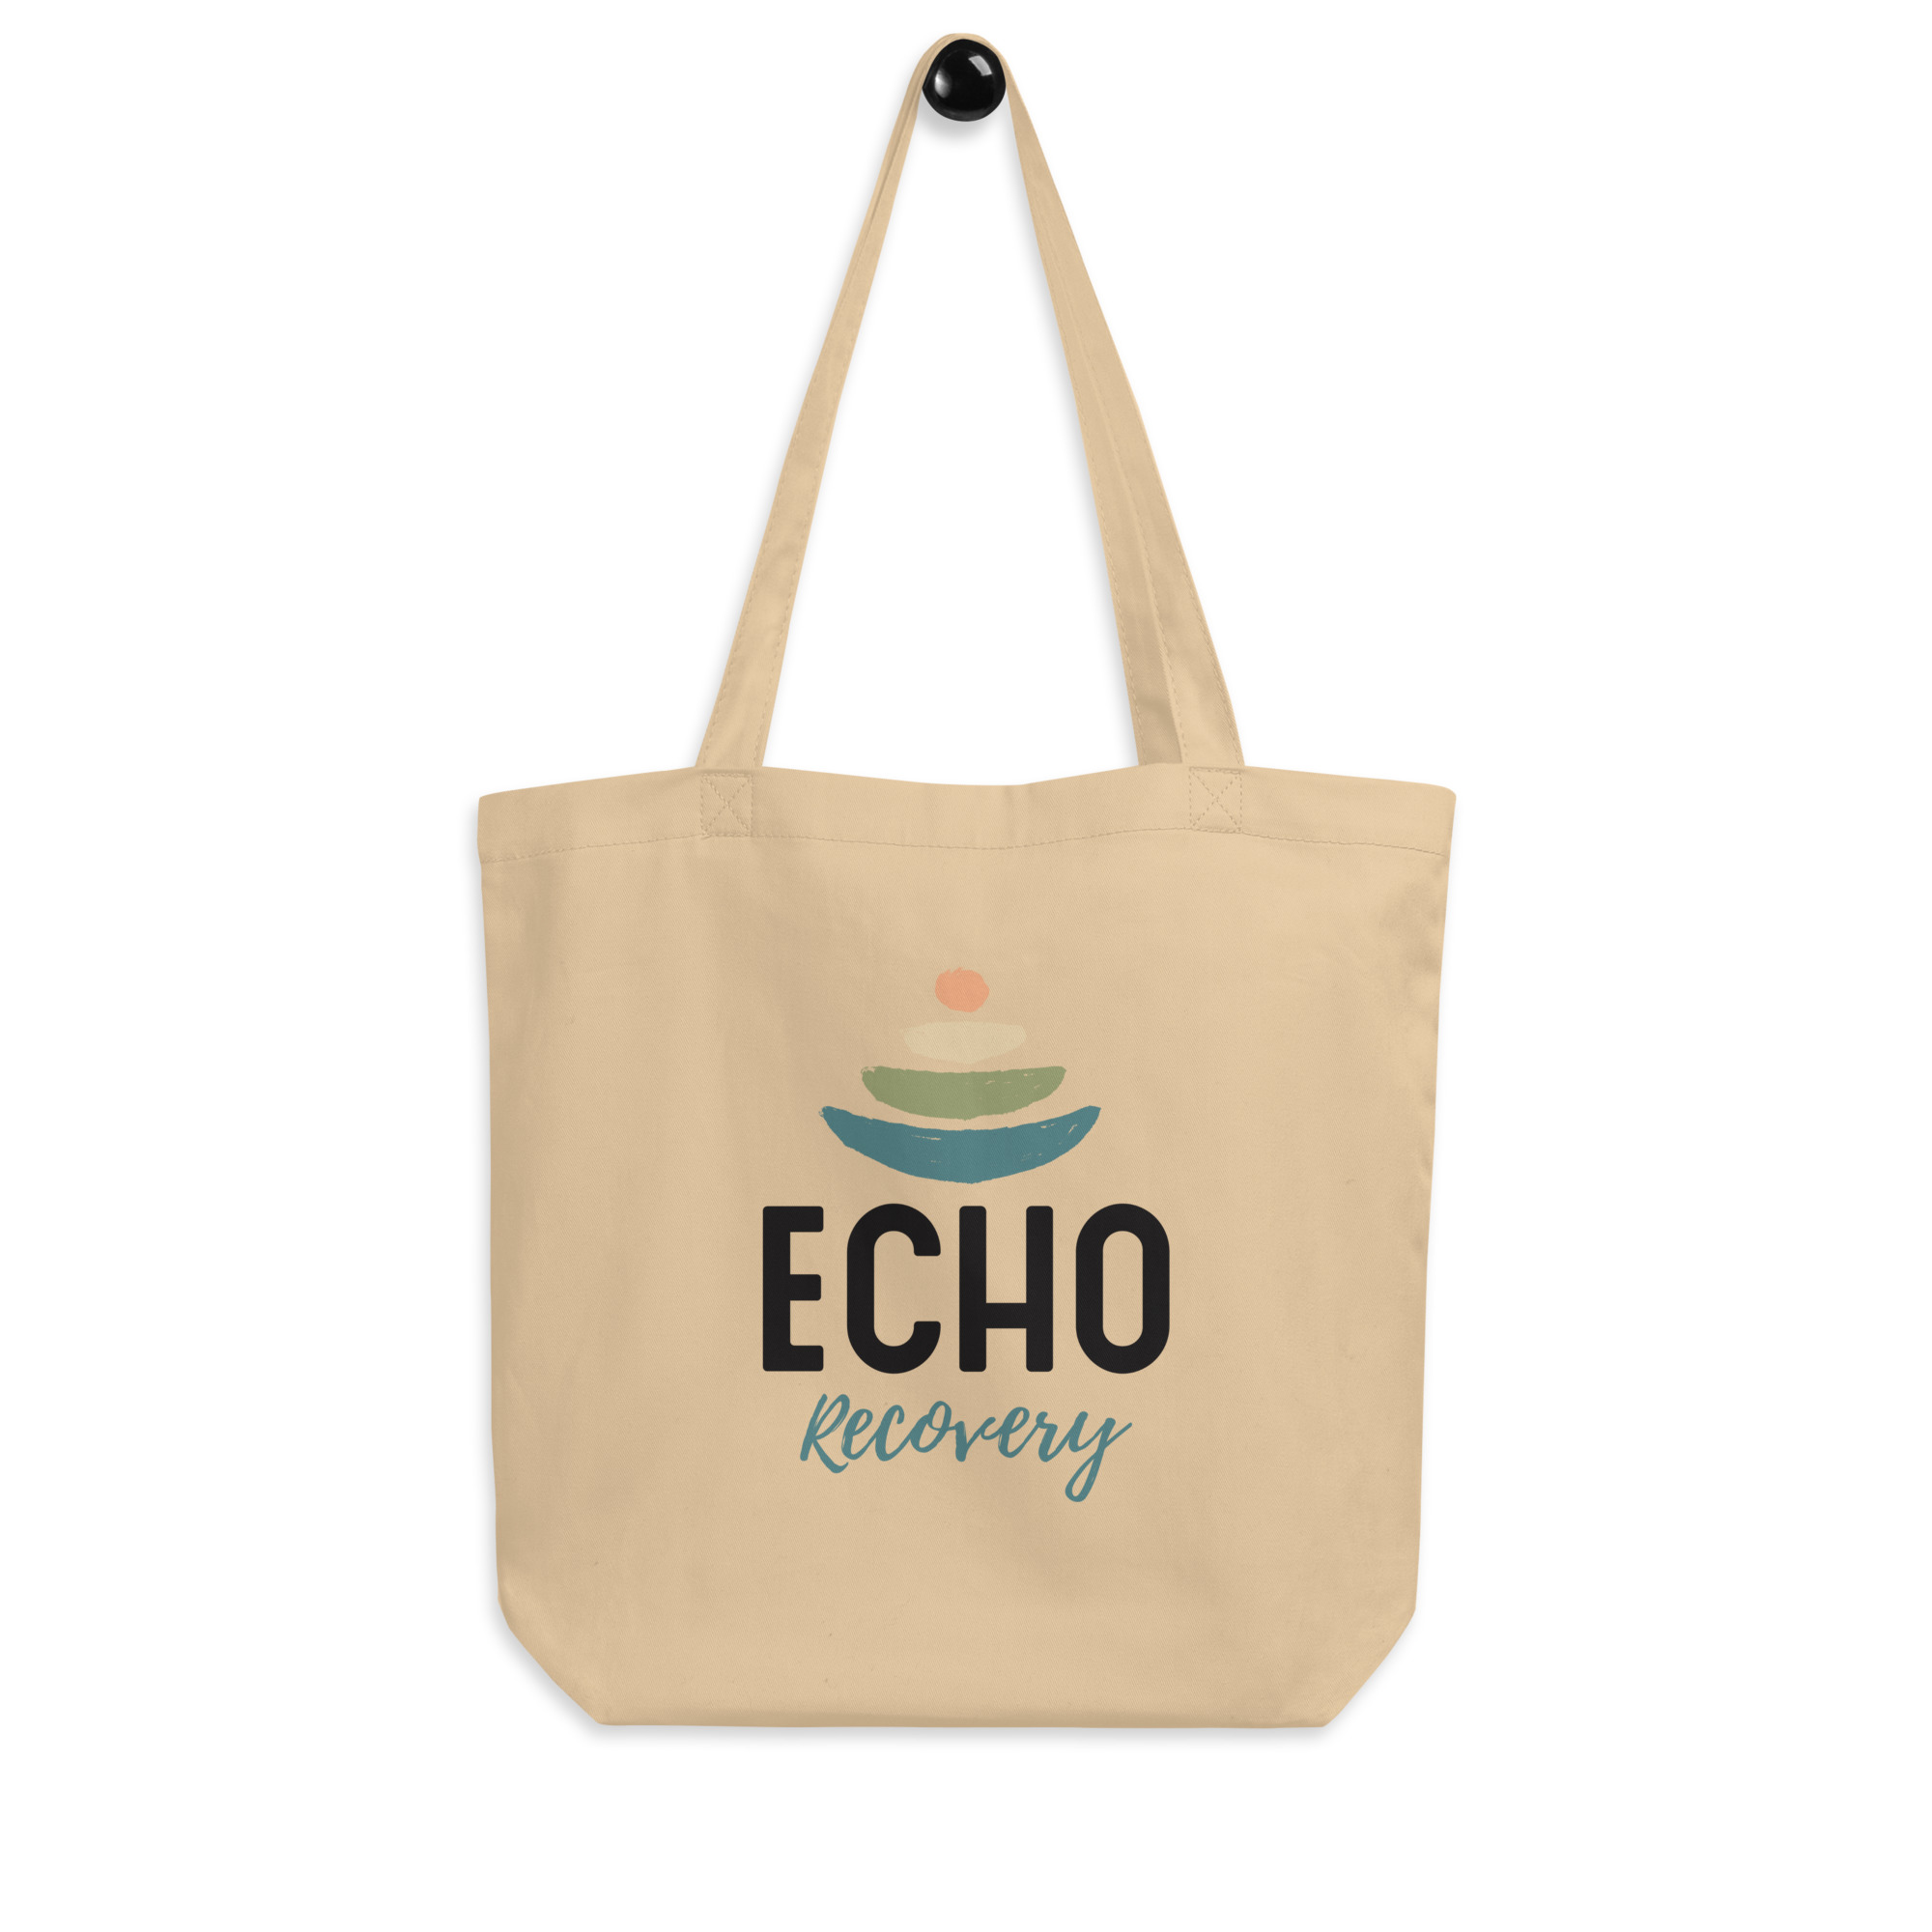 https://echorecovery.org/wp-content/uploads/2022/06/eco-tote-bag-oyster-back-6297fbb67cc42.jpg